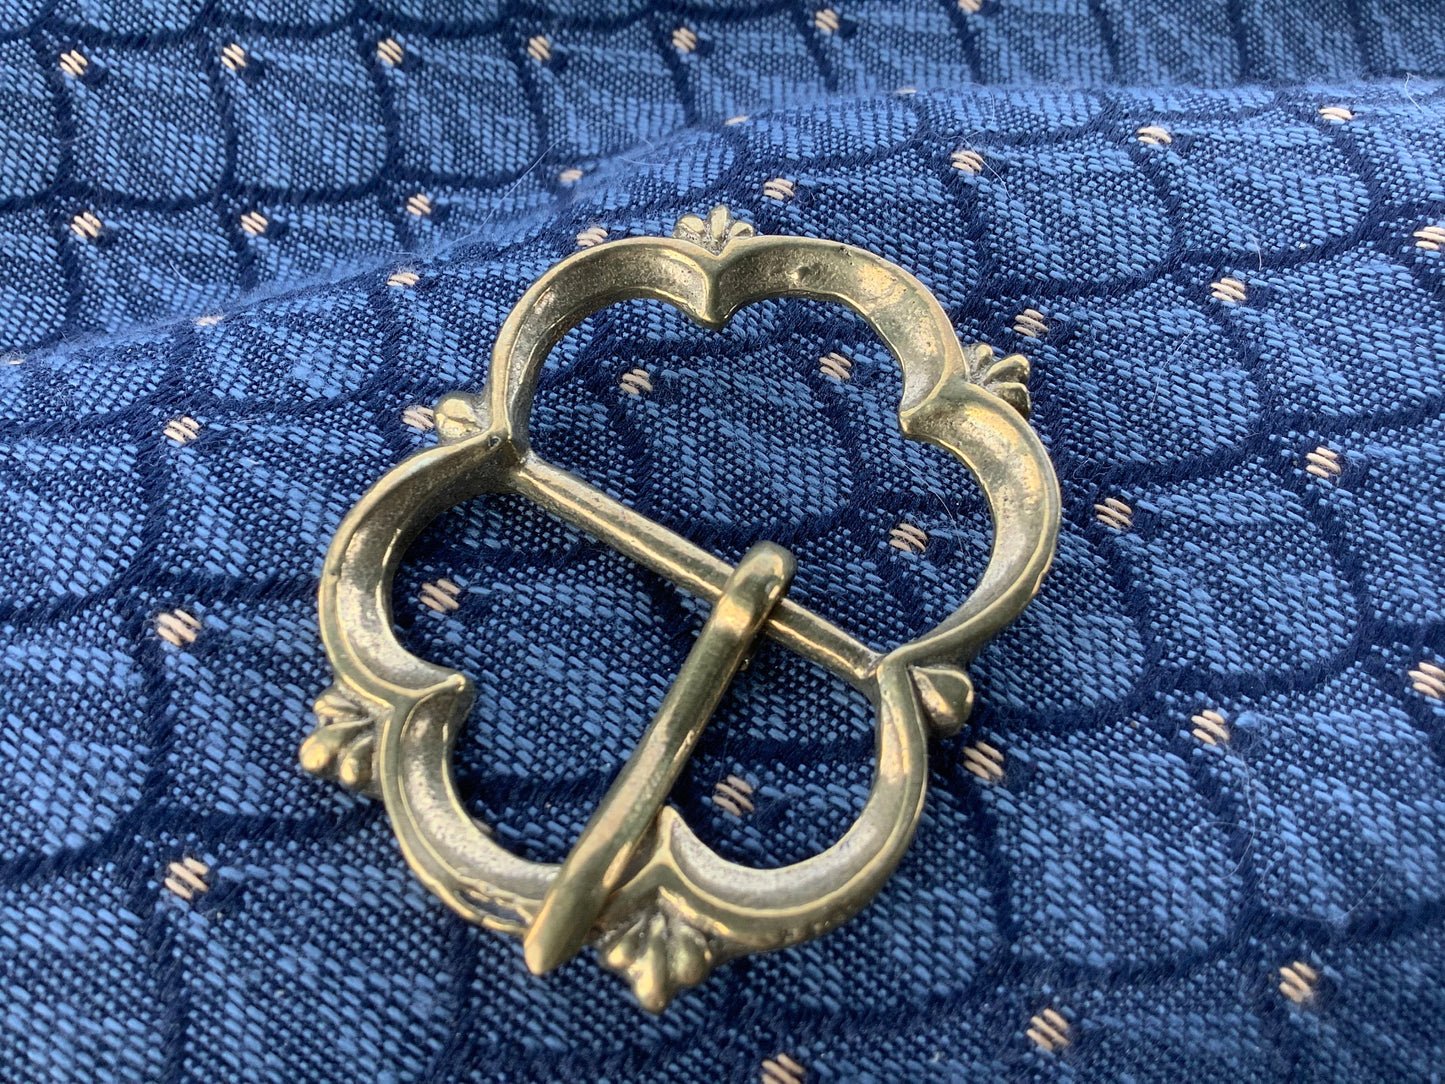 Medieval Spectacle Buckle - Double Tri-lobed Spectacle